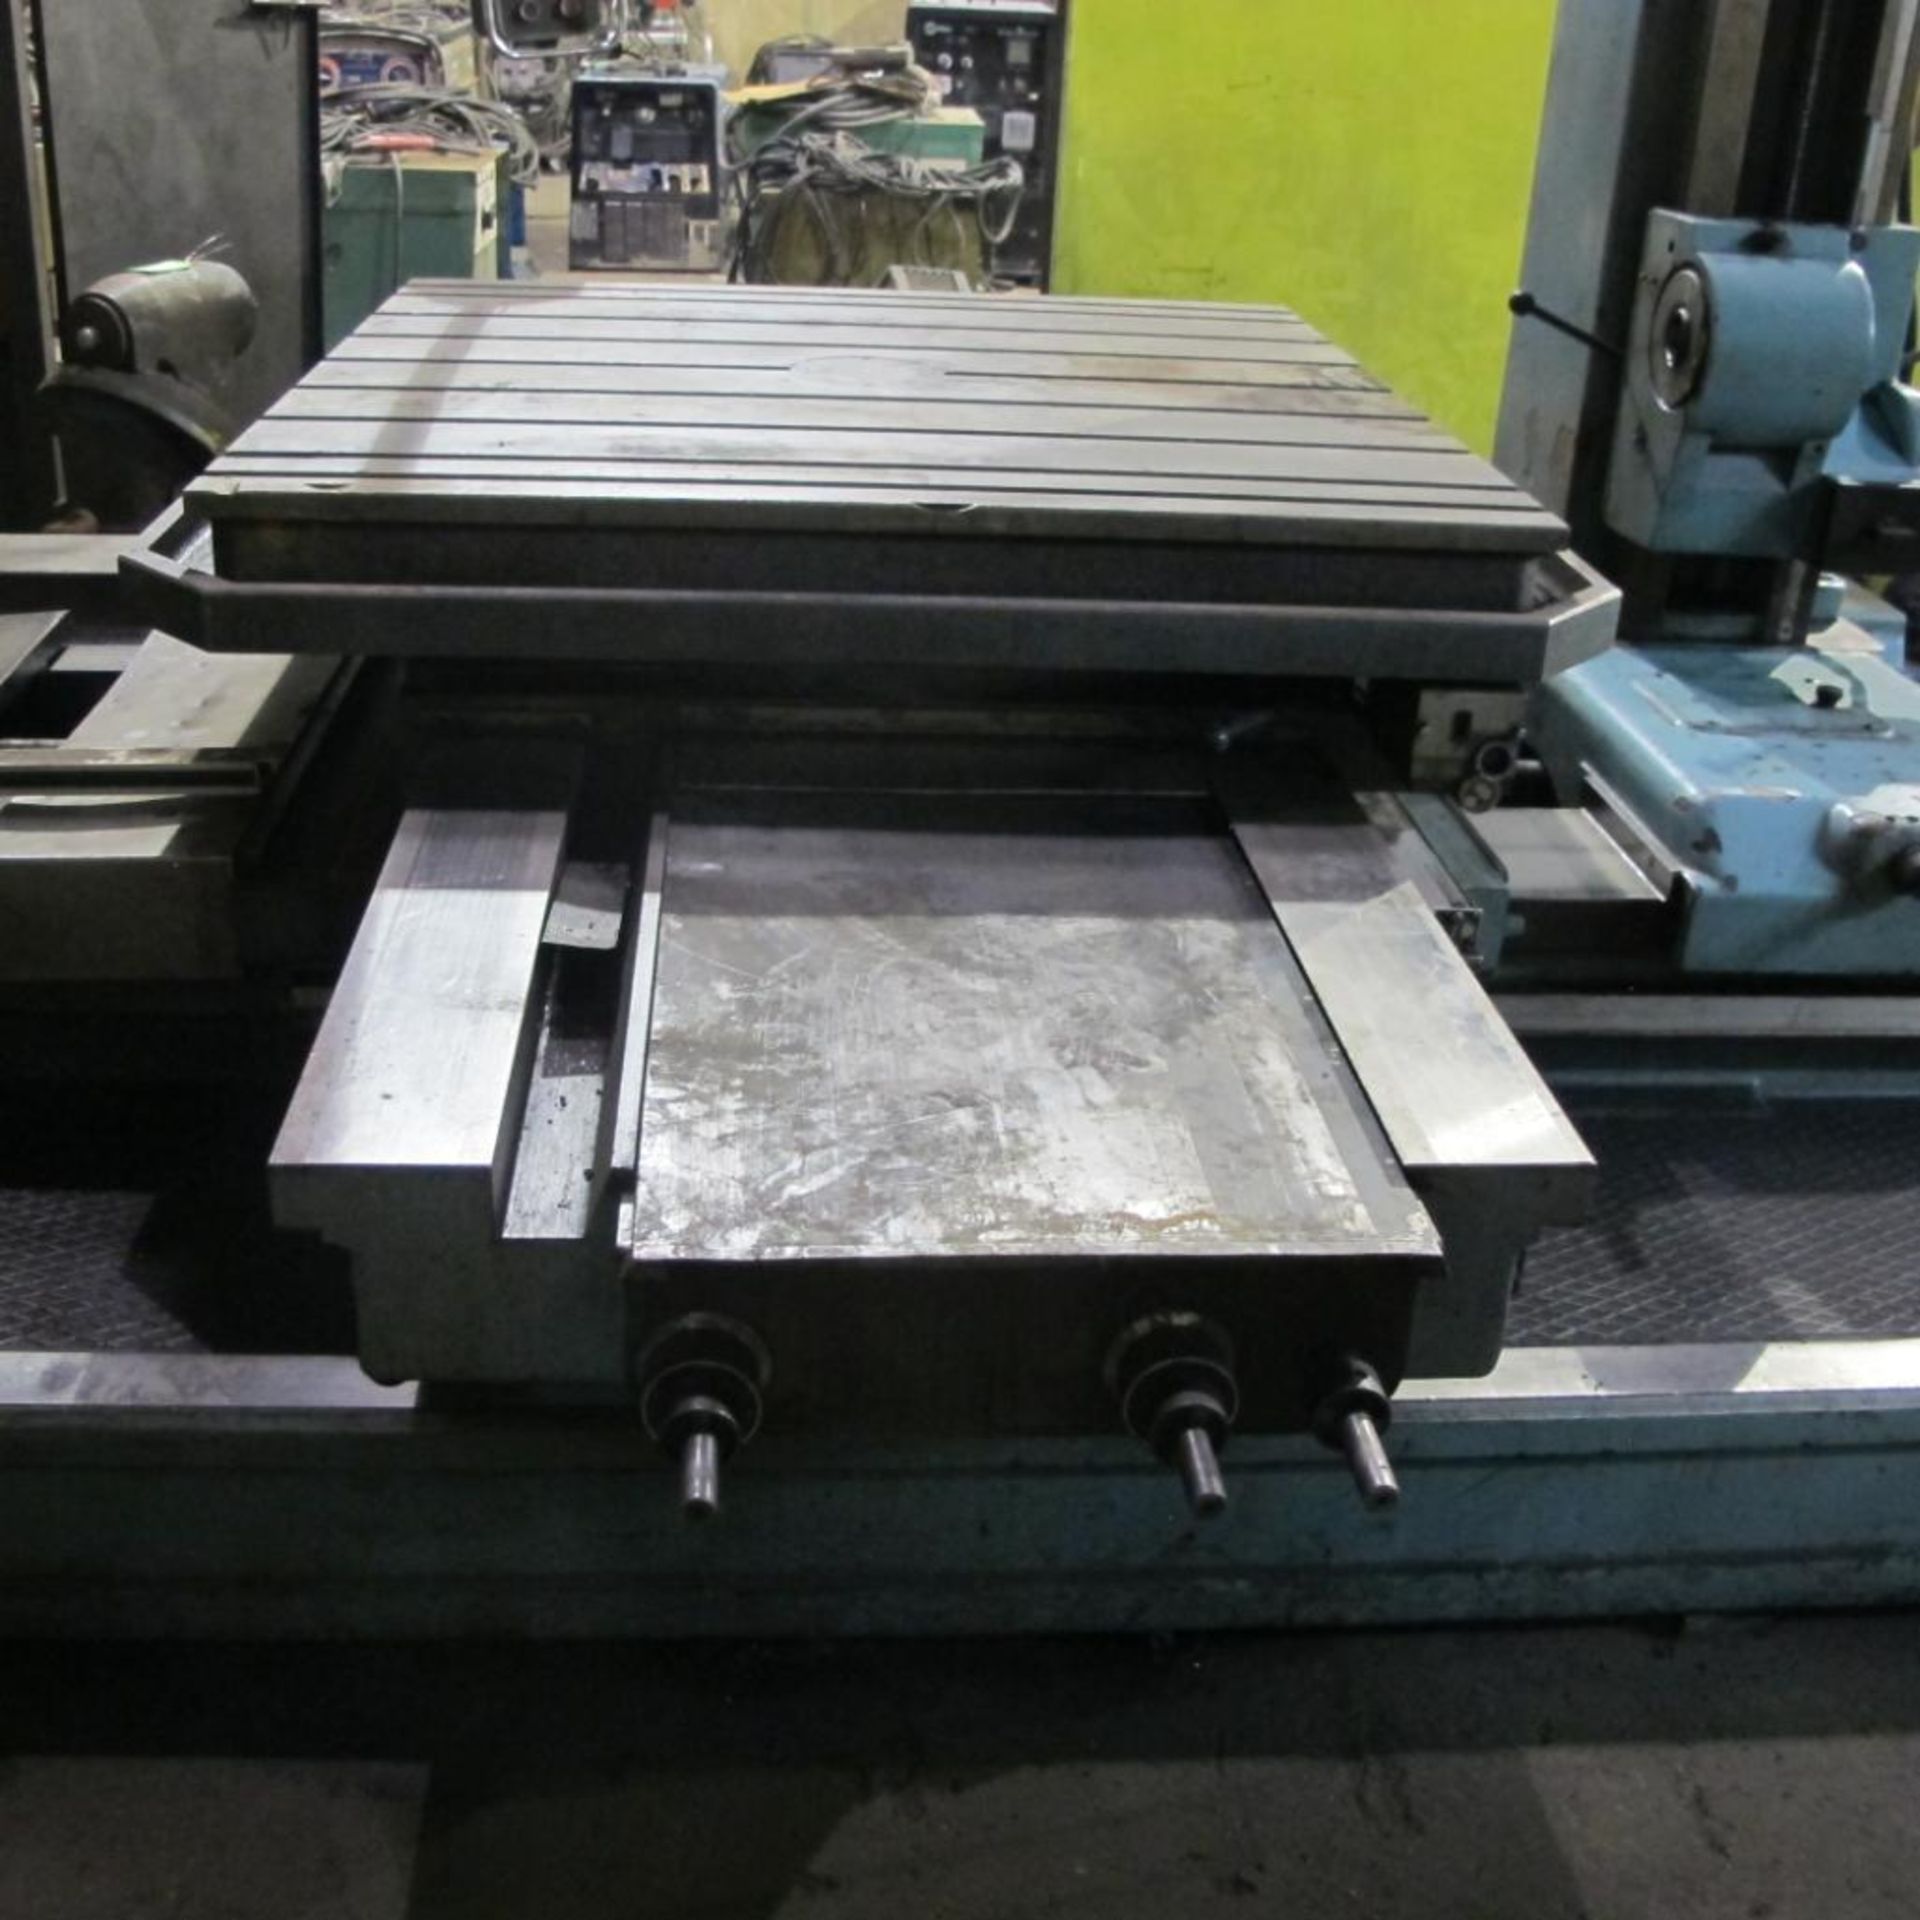 TOS HORIZONTAL BORING MILL MODEL W100A, 4" HEAD, 49" TABLE, TAILSTOCK, HEIDENHAIN 4 AXIS DRO, S/N 30 - Image 12 of 23